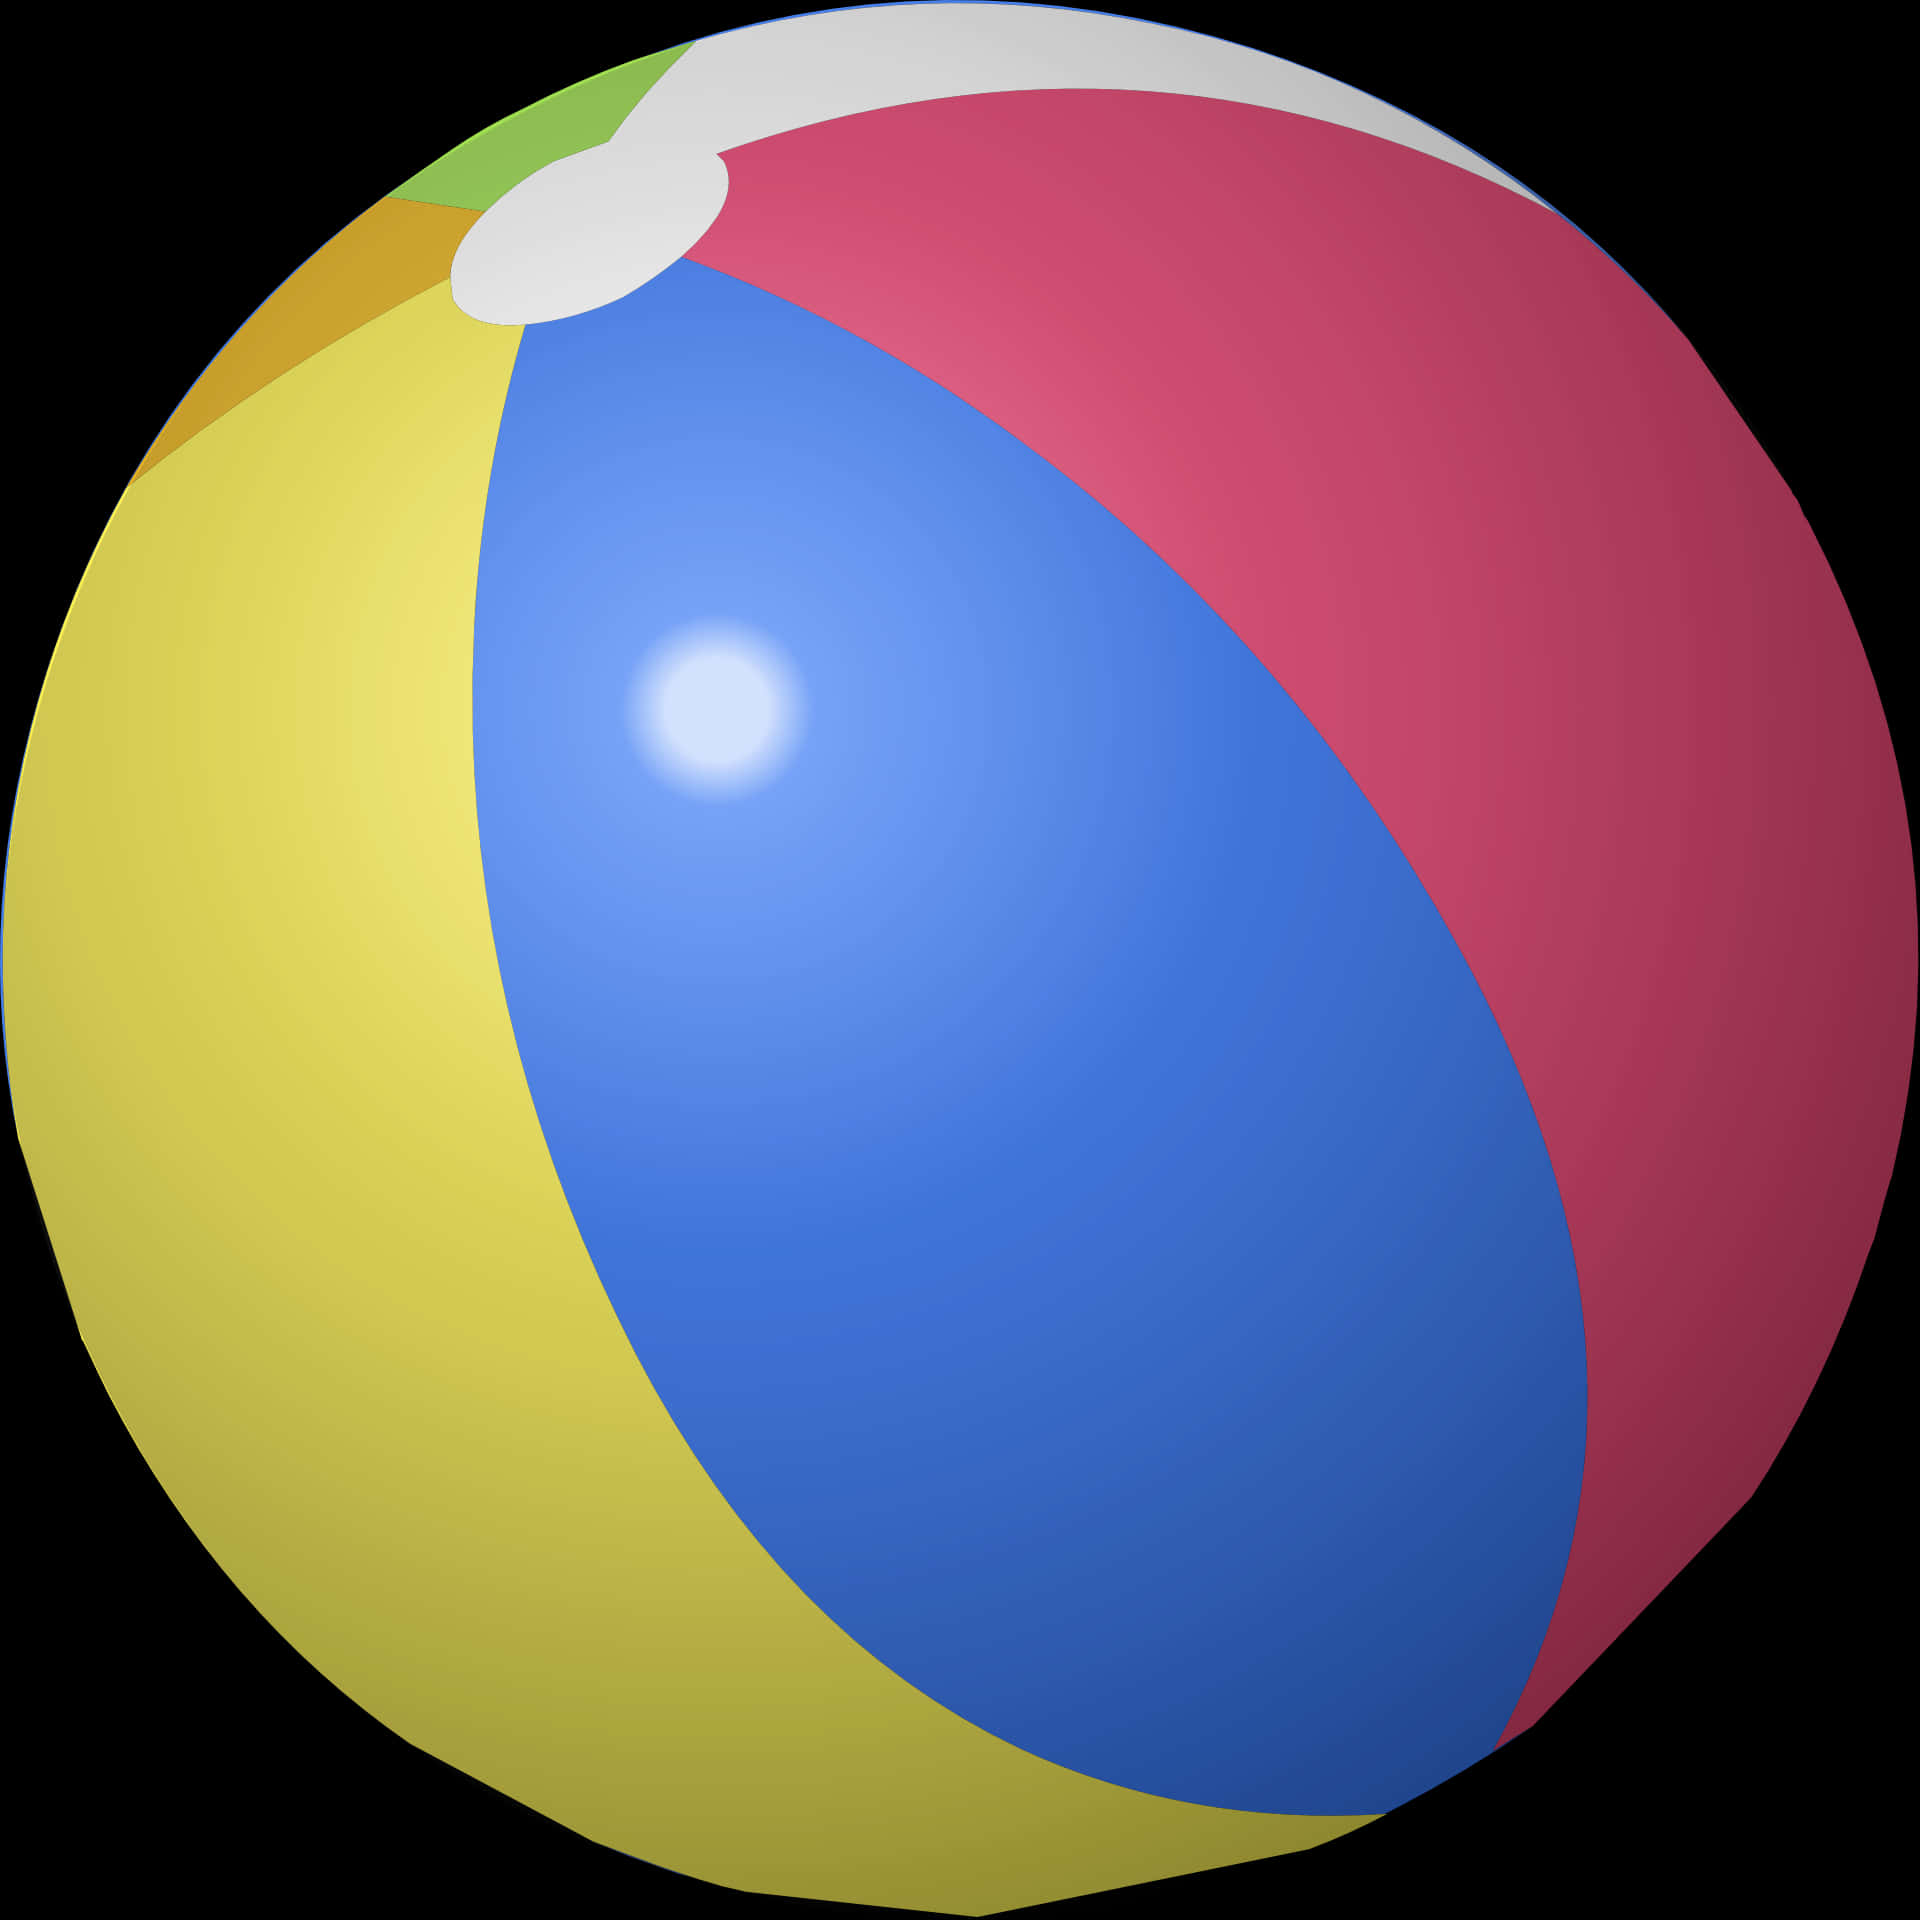 Colorful Beach Ball Illustration PNG image